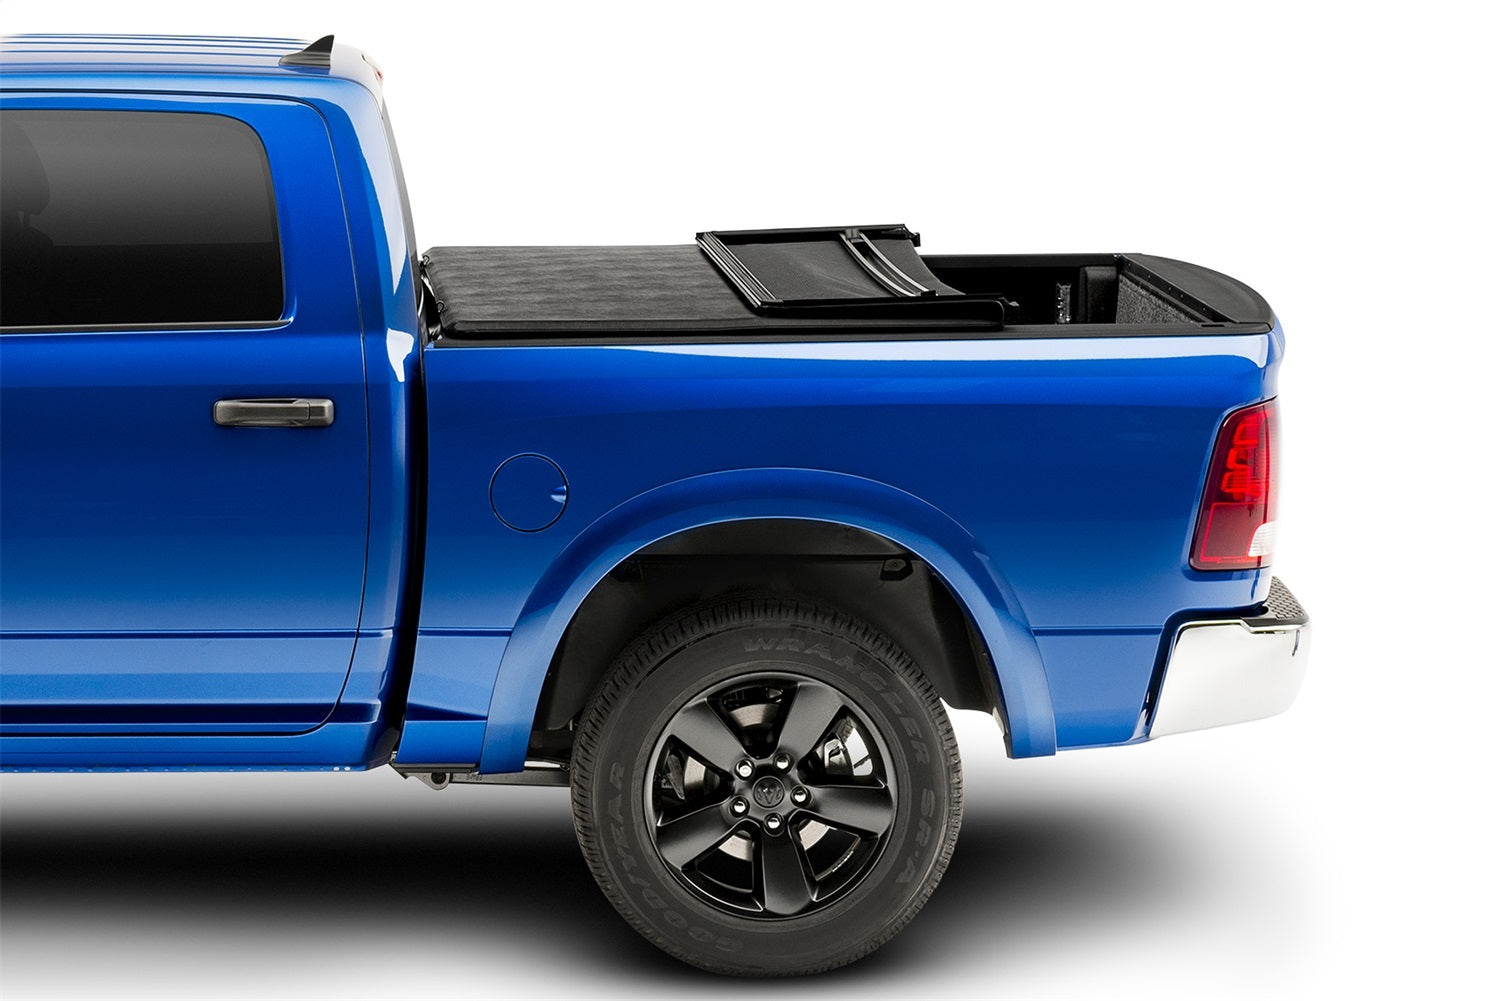 Extang 92560 Trifecta 2.0 Tonneau Cover Fits 94-03 Hombre S10 Pickup Sonoma